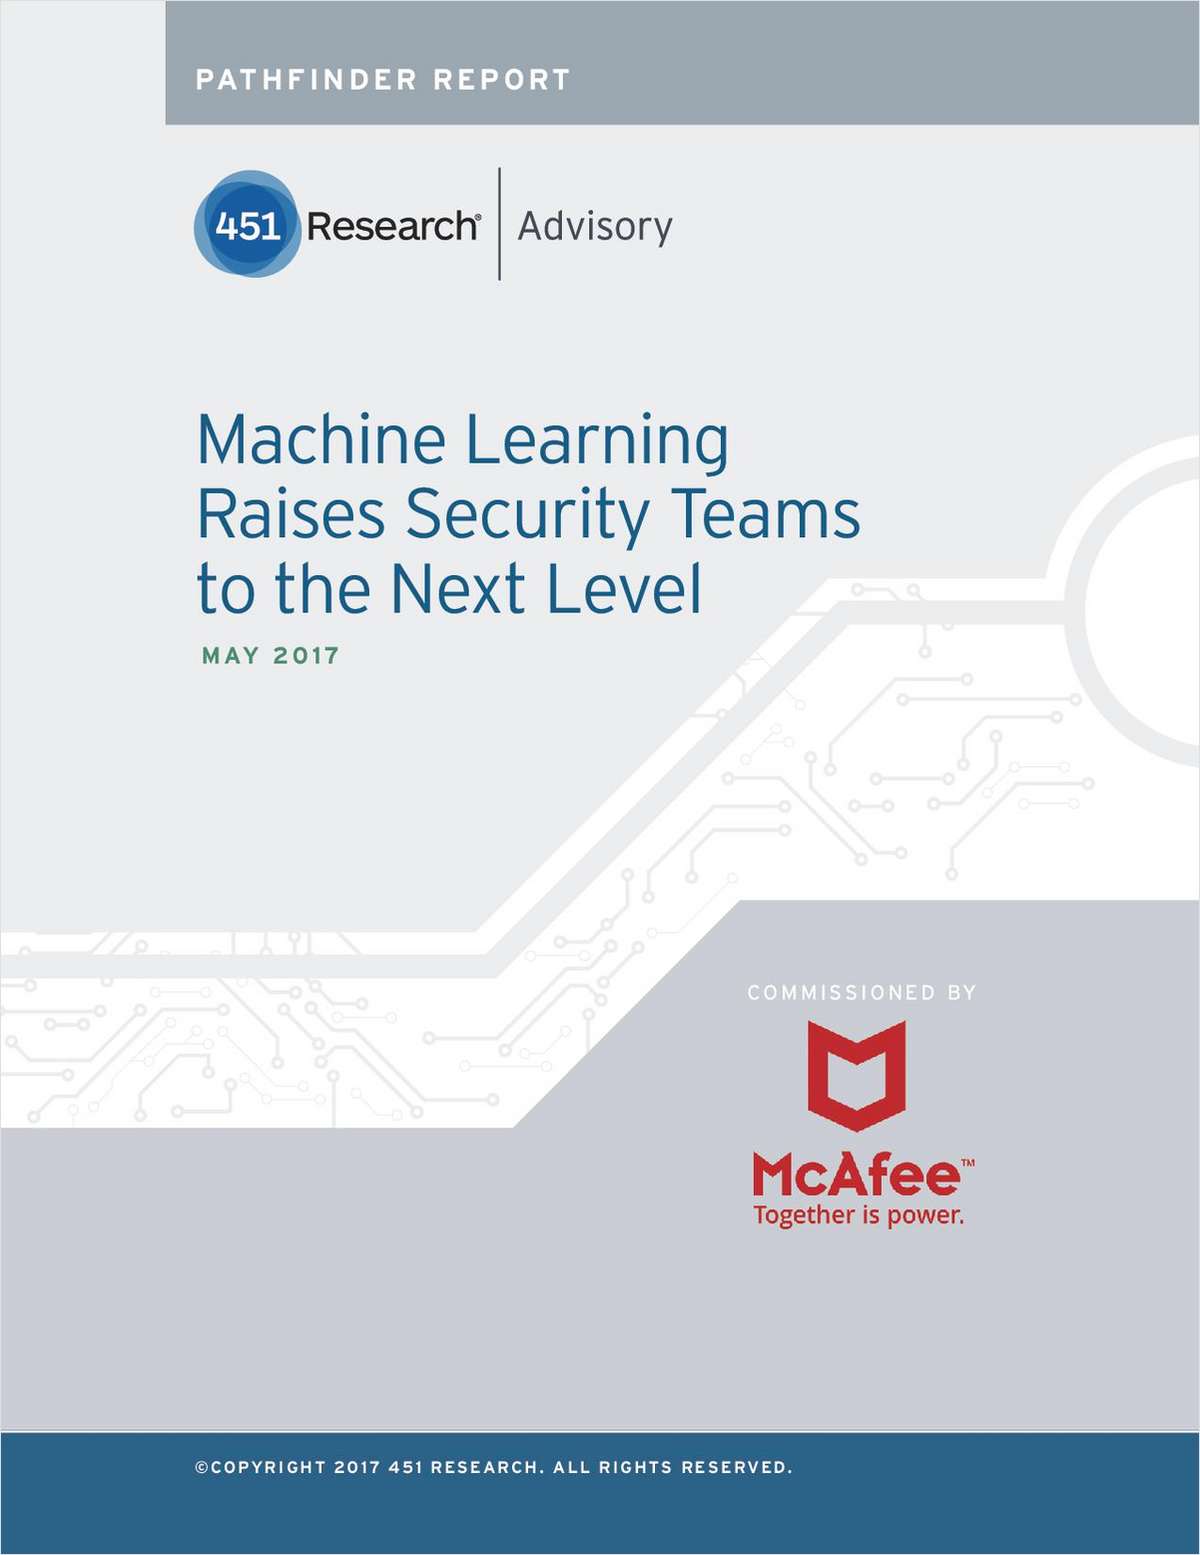 Machine Learning Raises Security Teams to the Next Level